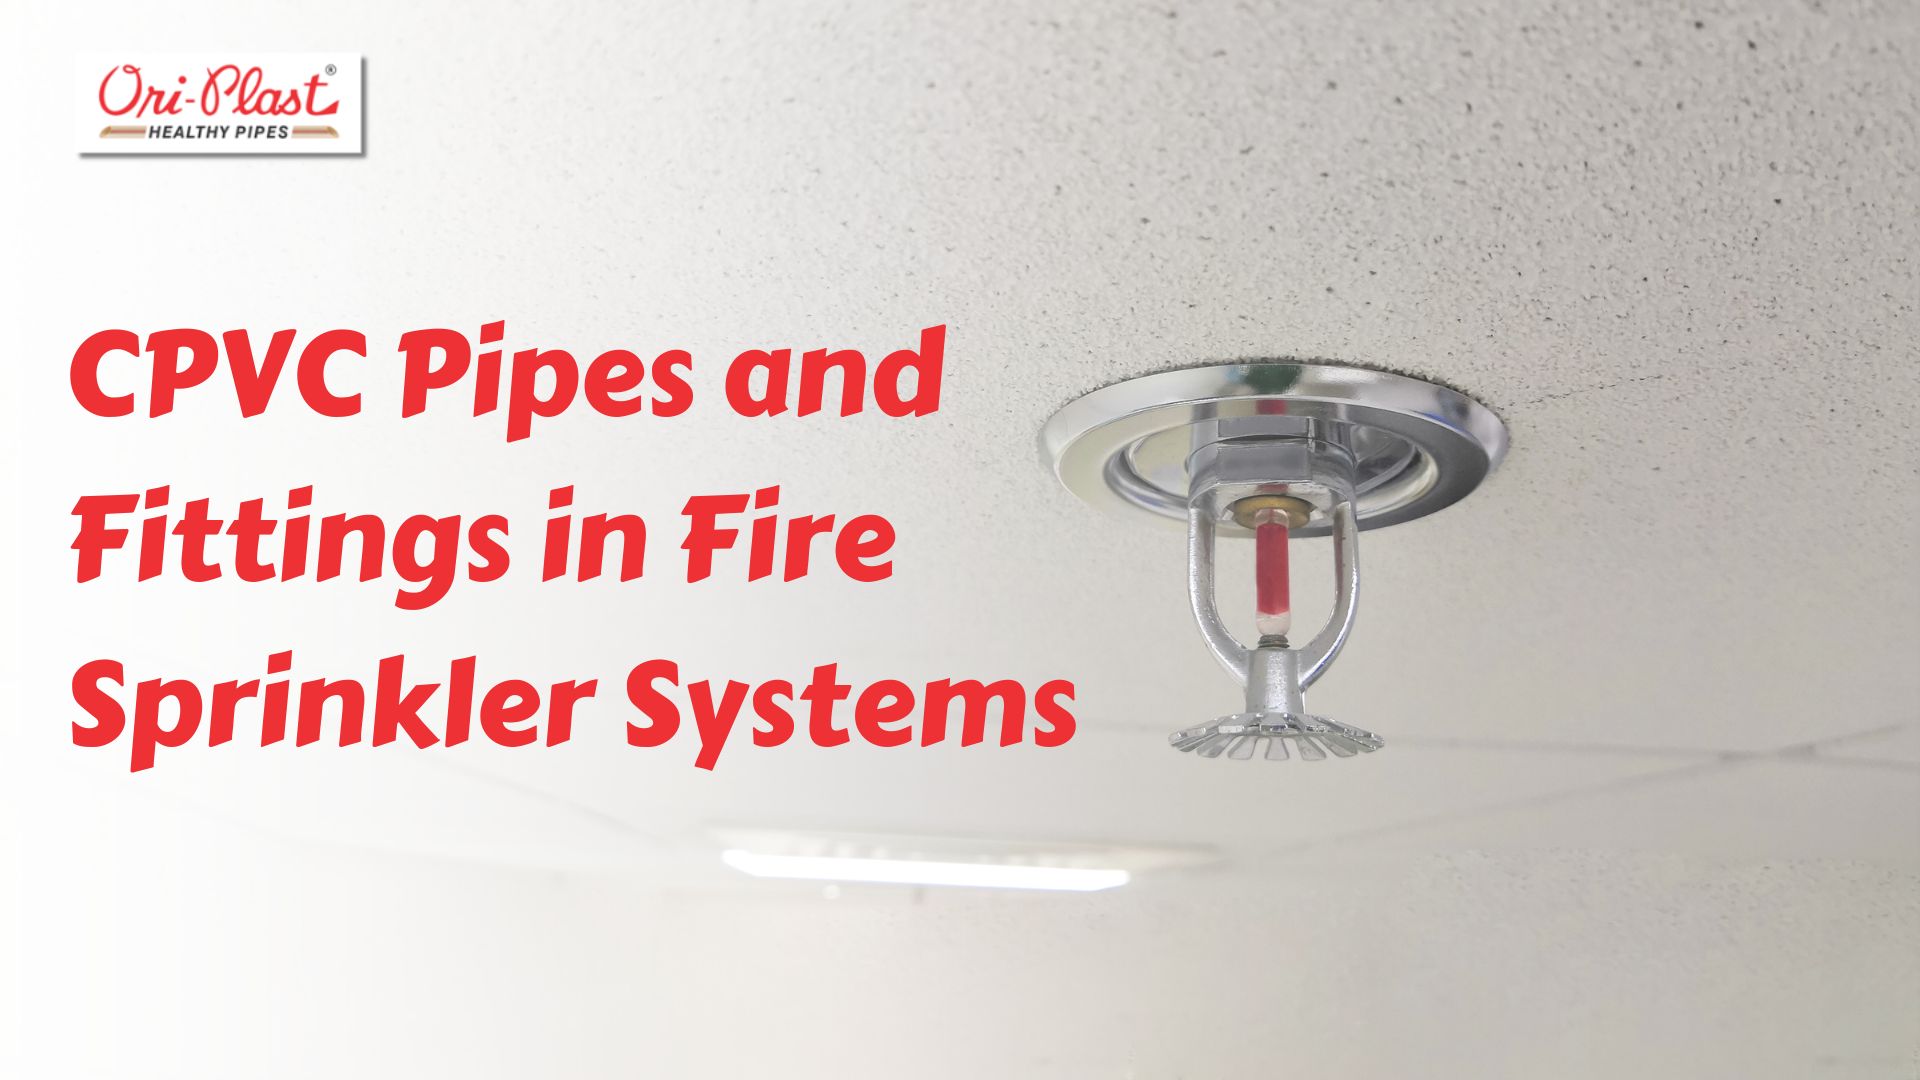 CPVC Pipes and Fittings in Fire Sprinkler Systems